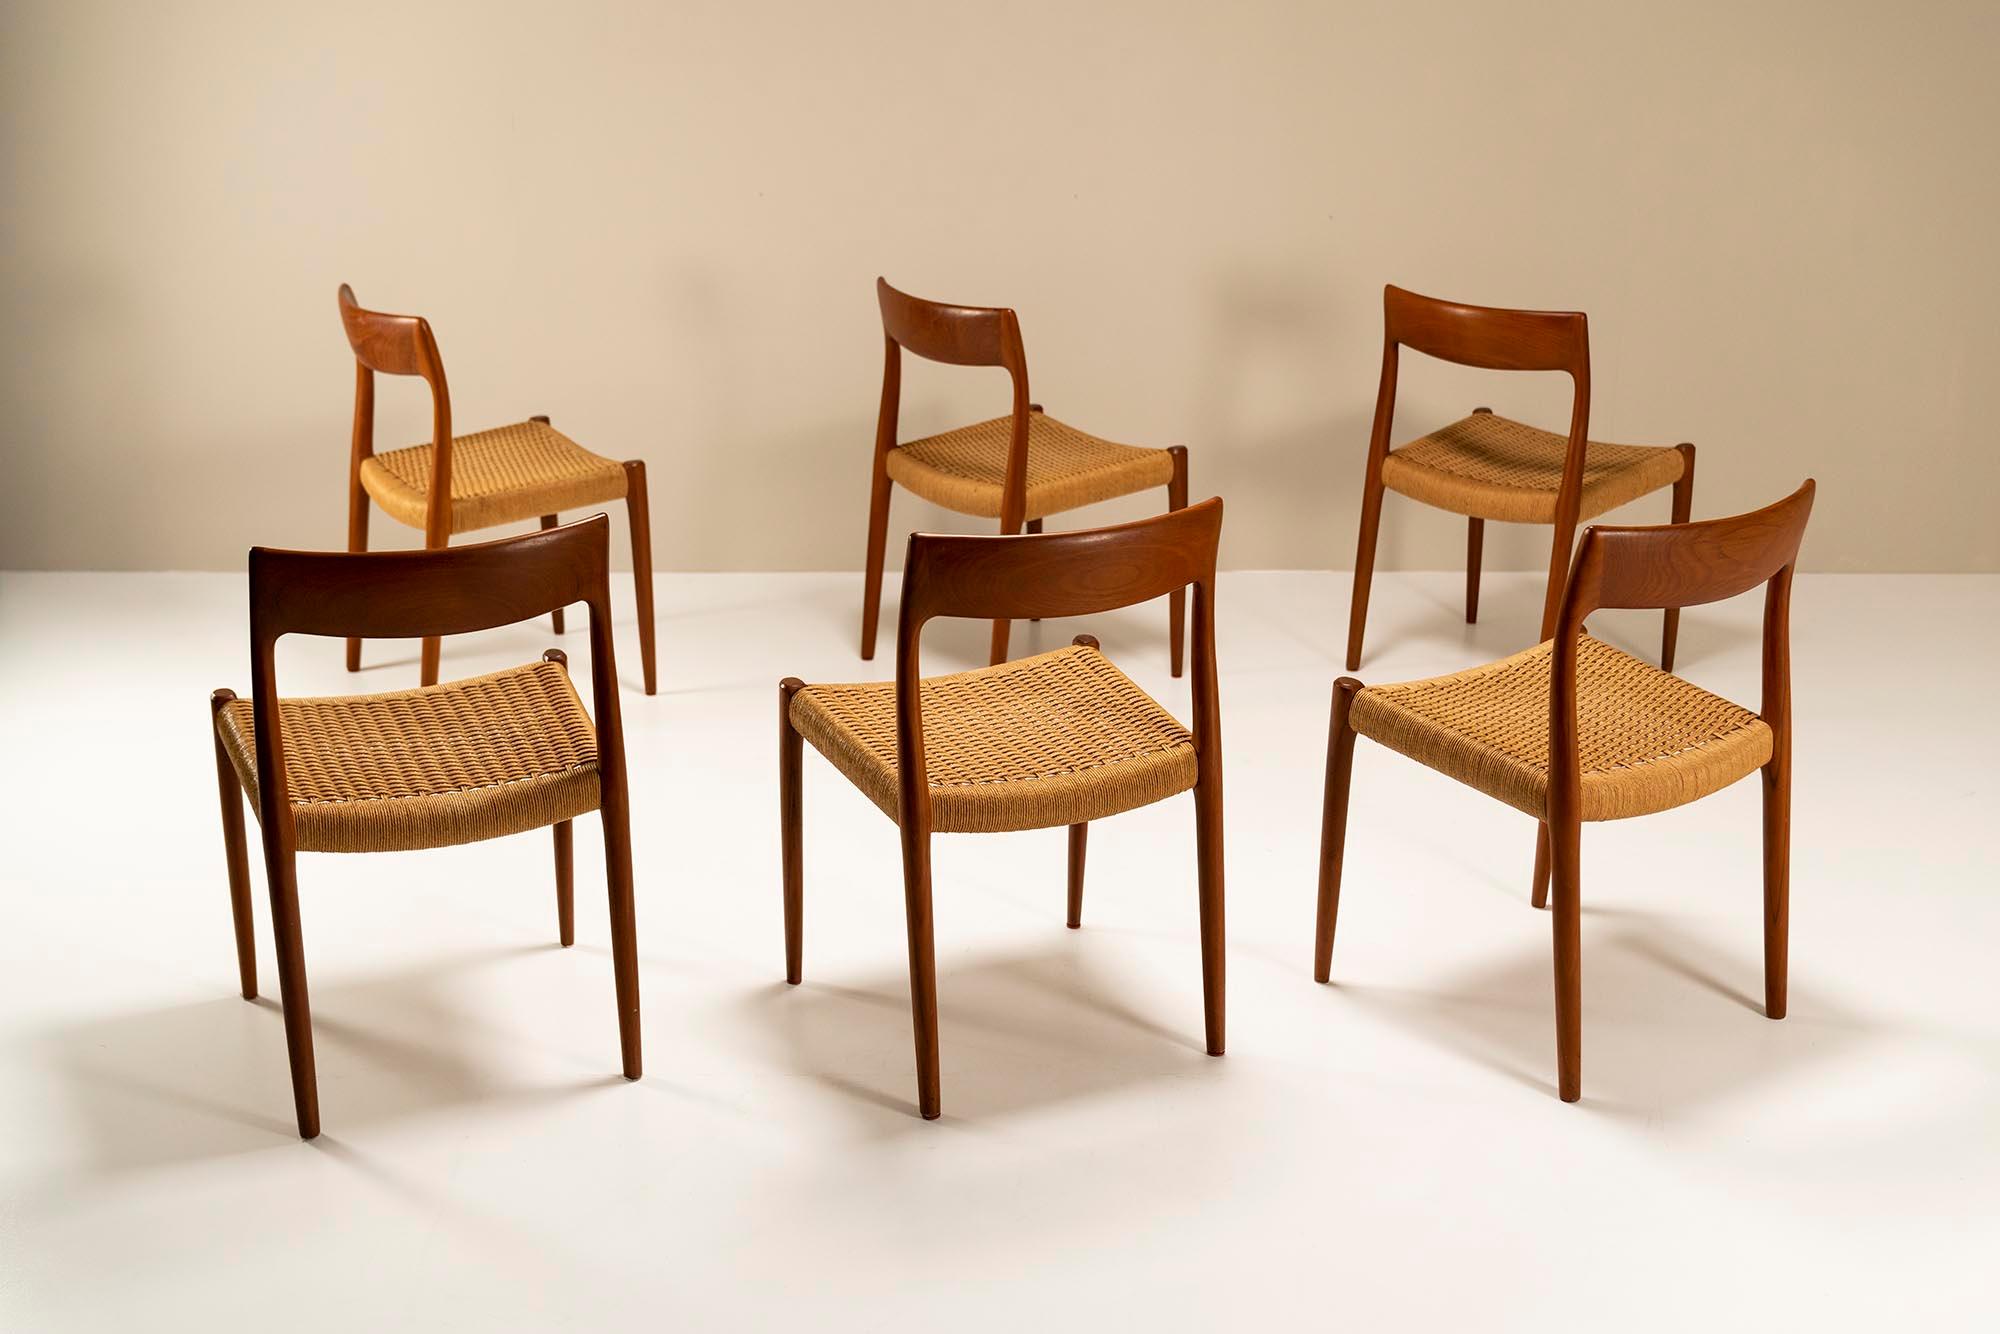 A beautiful set of six legendary models 77 dining chairs by the Danish designer Niels Otto Møller from 1959. Seemingly simple, yet very ingeniously crafted by master craftsmen at J.L Møbelfabrik. The connections of which the parts of this design are